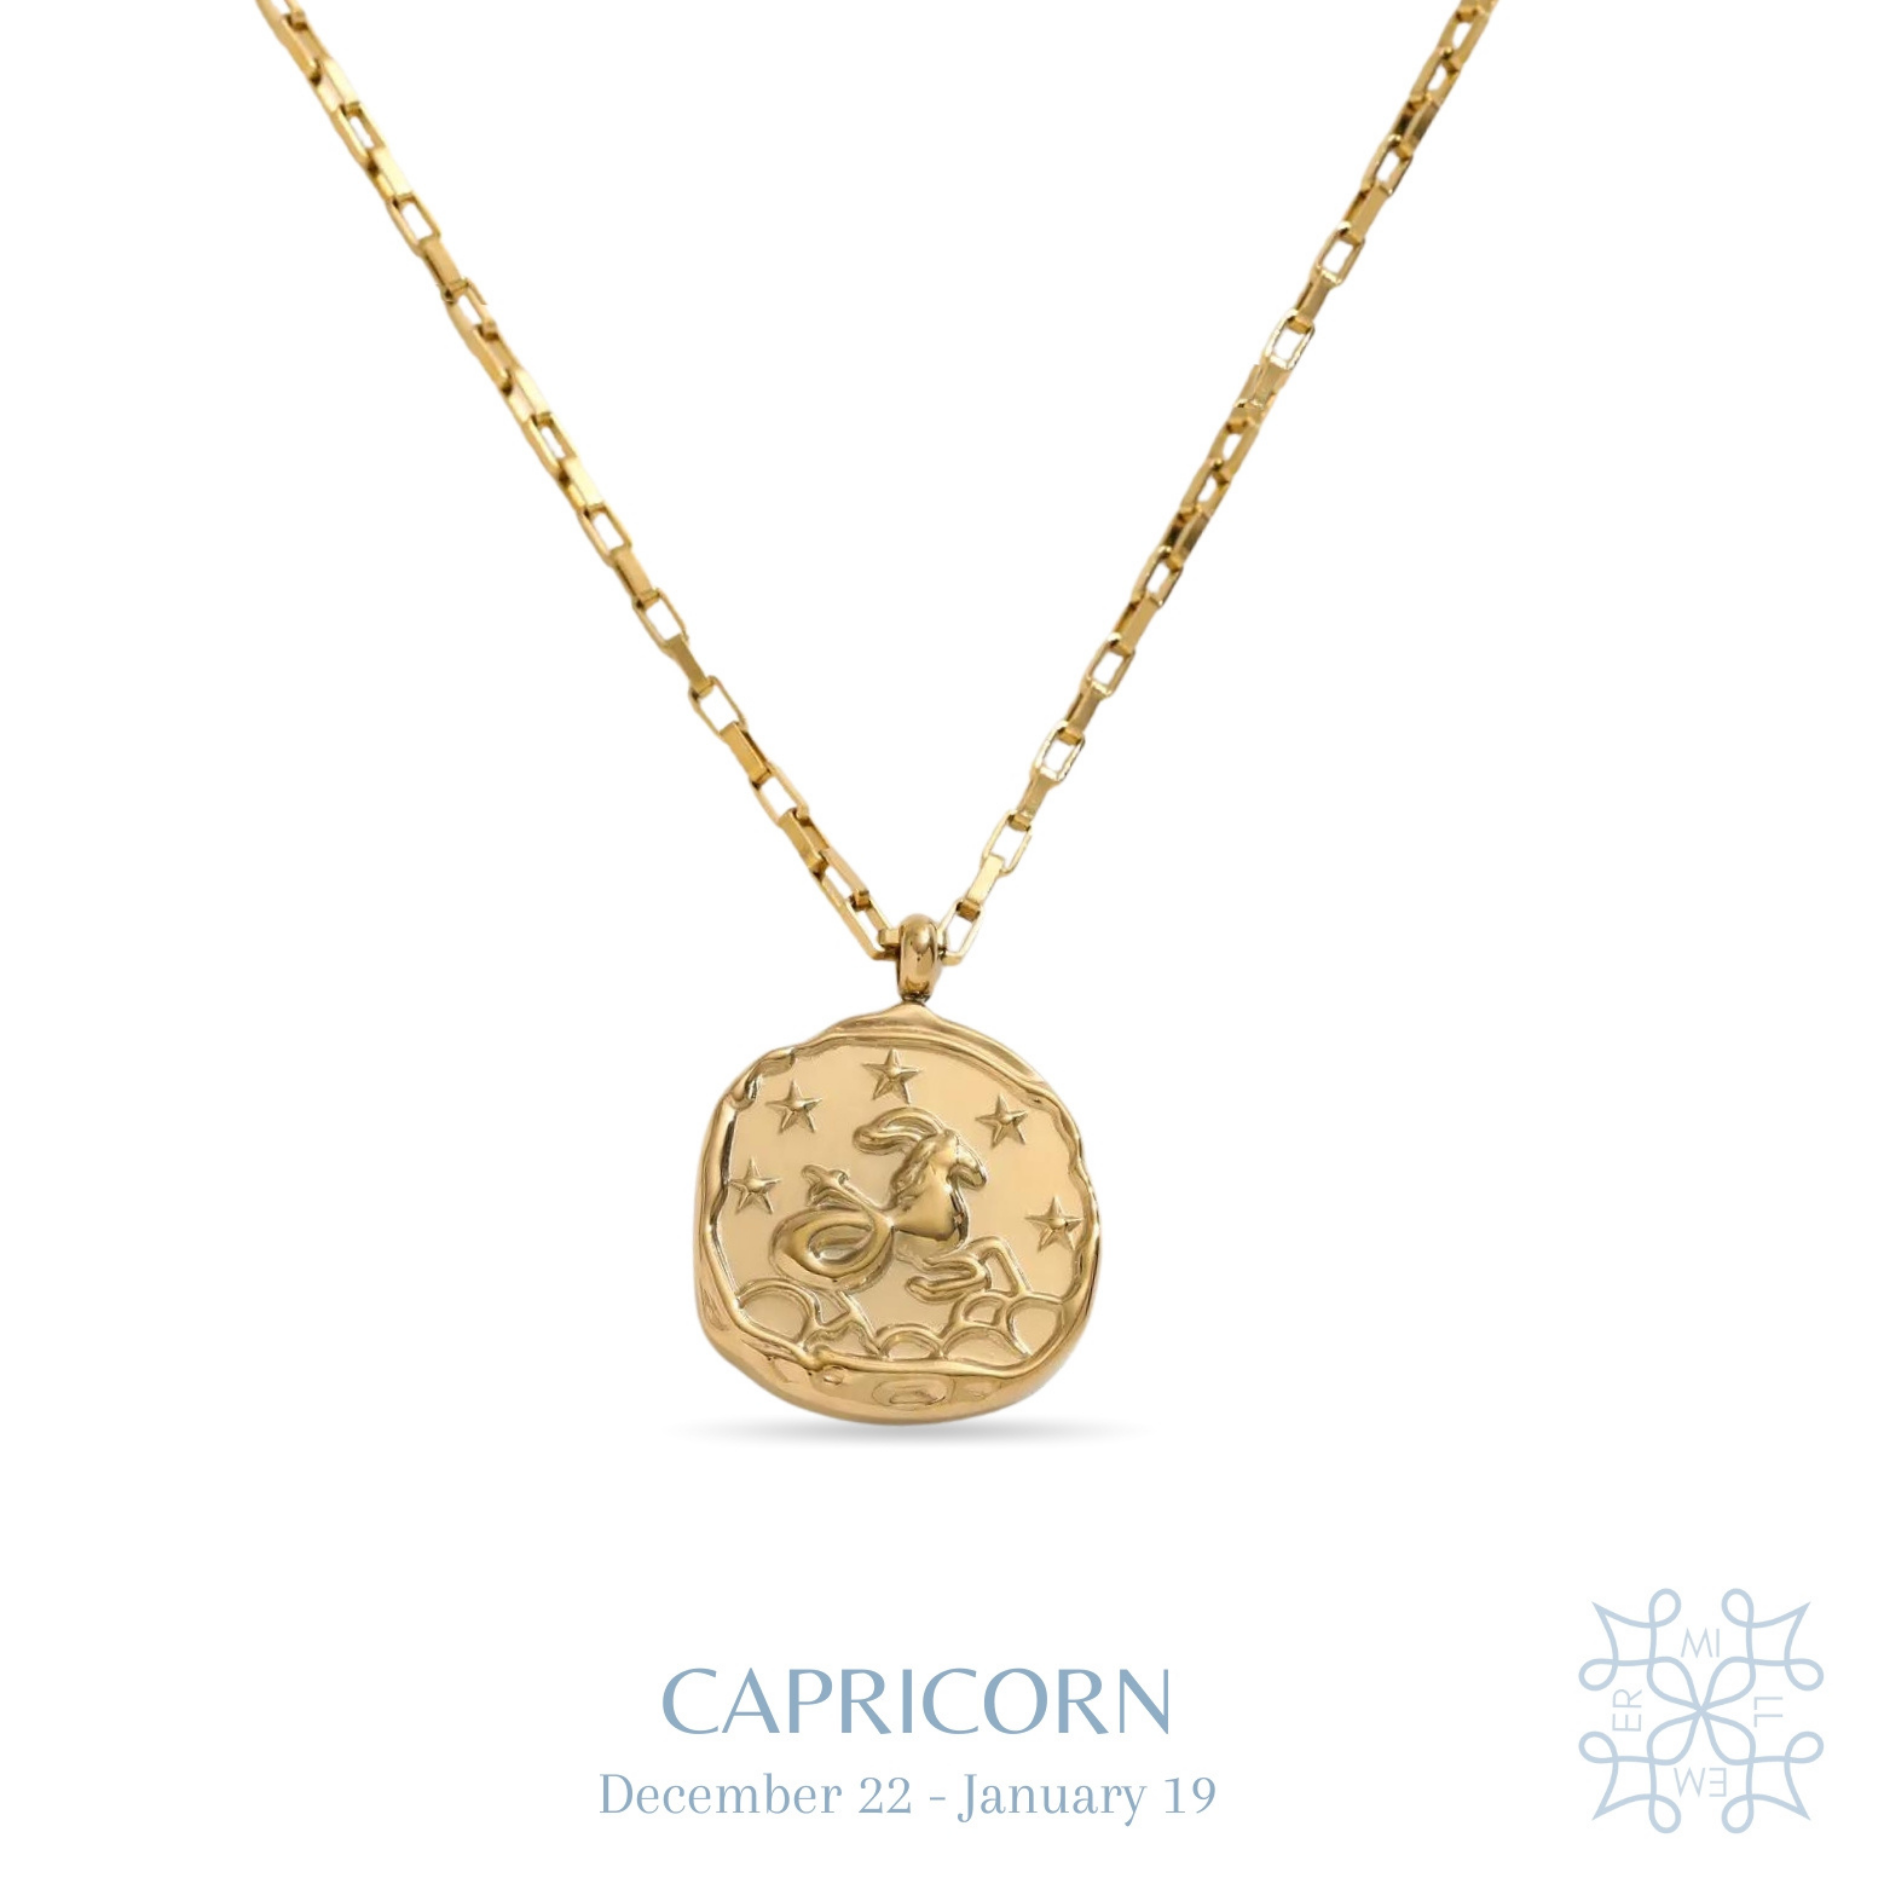 CAPRICORN ZODIAC MEDALLION GOLD NECKLACE - gold chain. medallion with an irregular shape. The sign of the goat is engraved on the medallion with a typical half-fish, half-animal image of the goat. Five engraved stars are on the top of the goat.